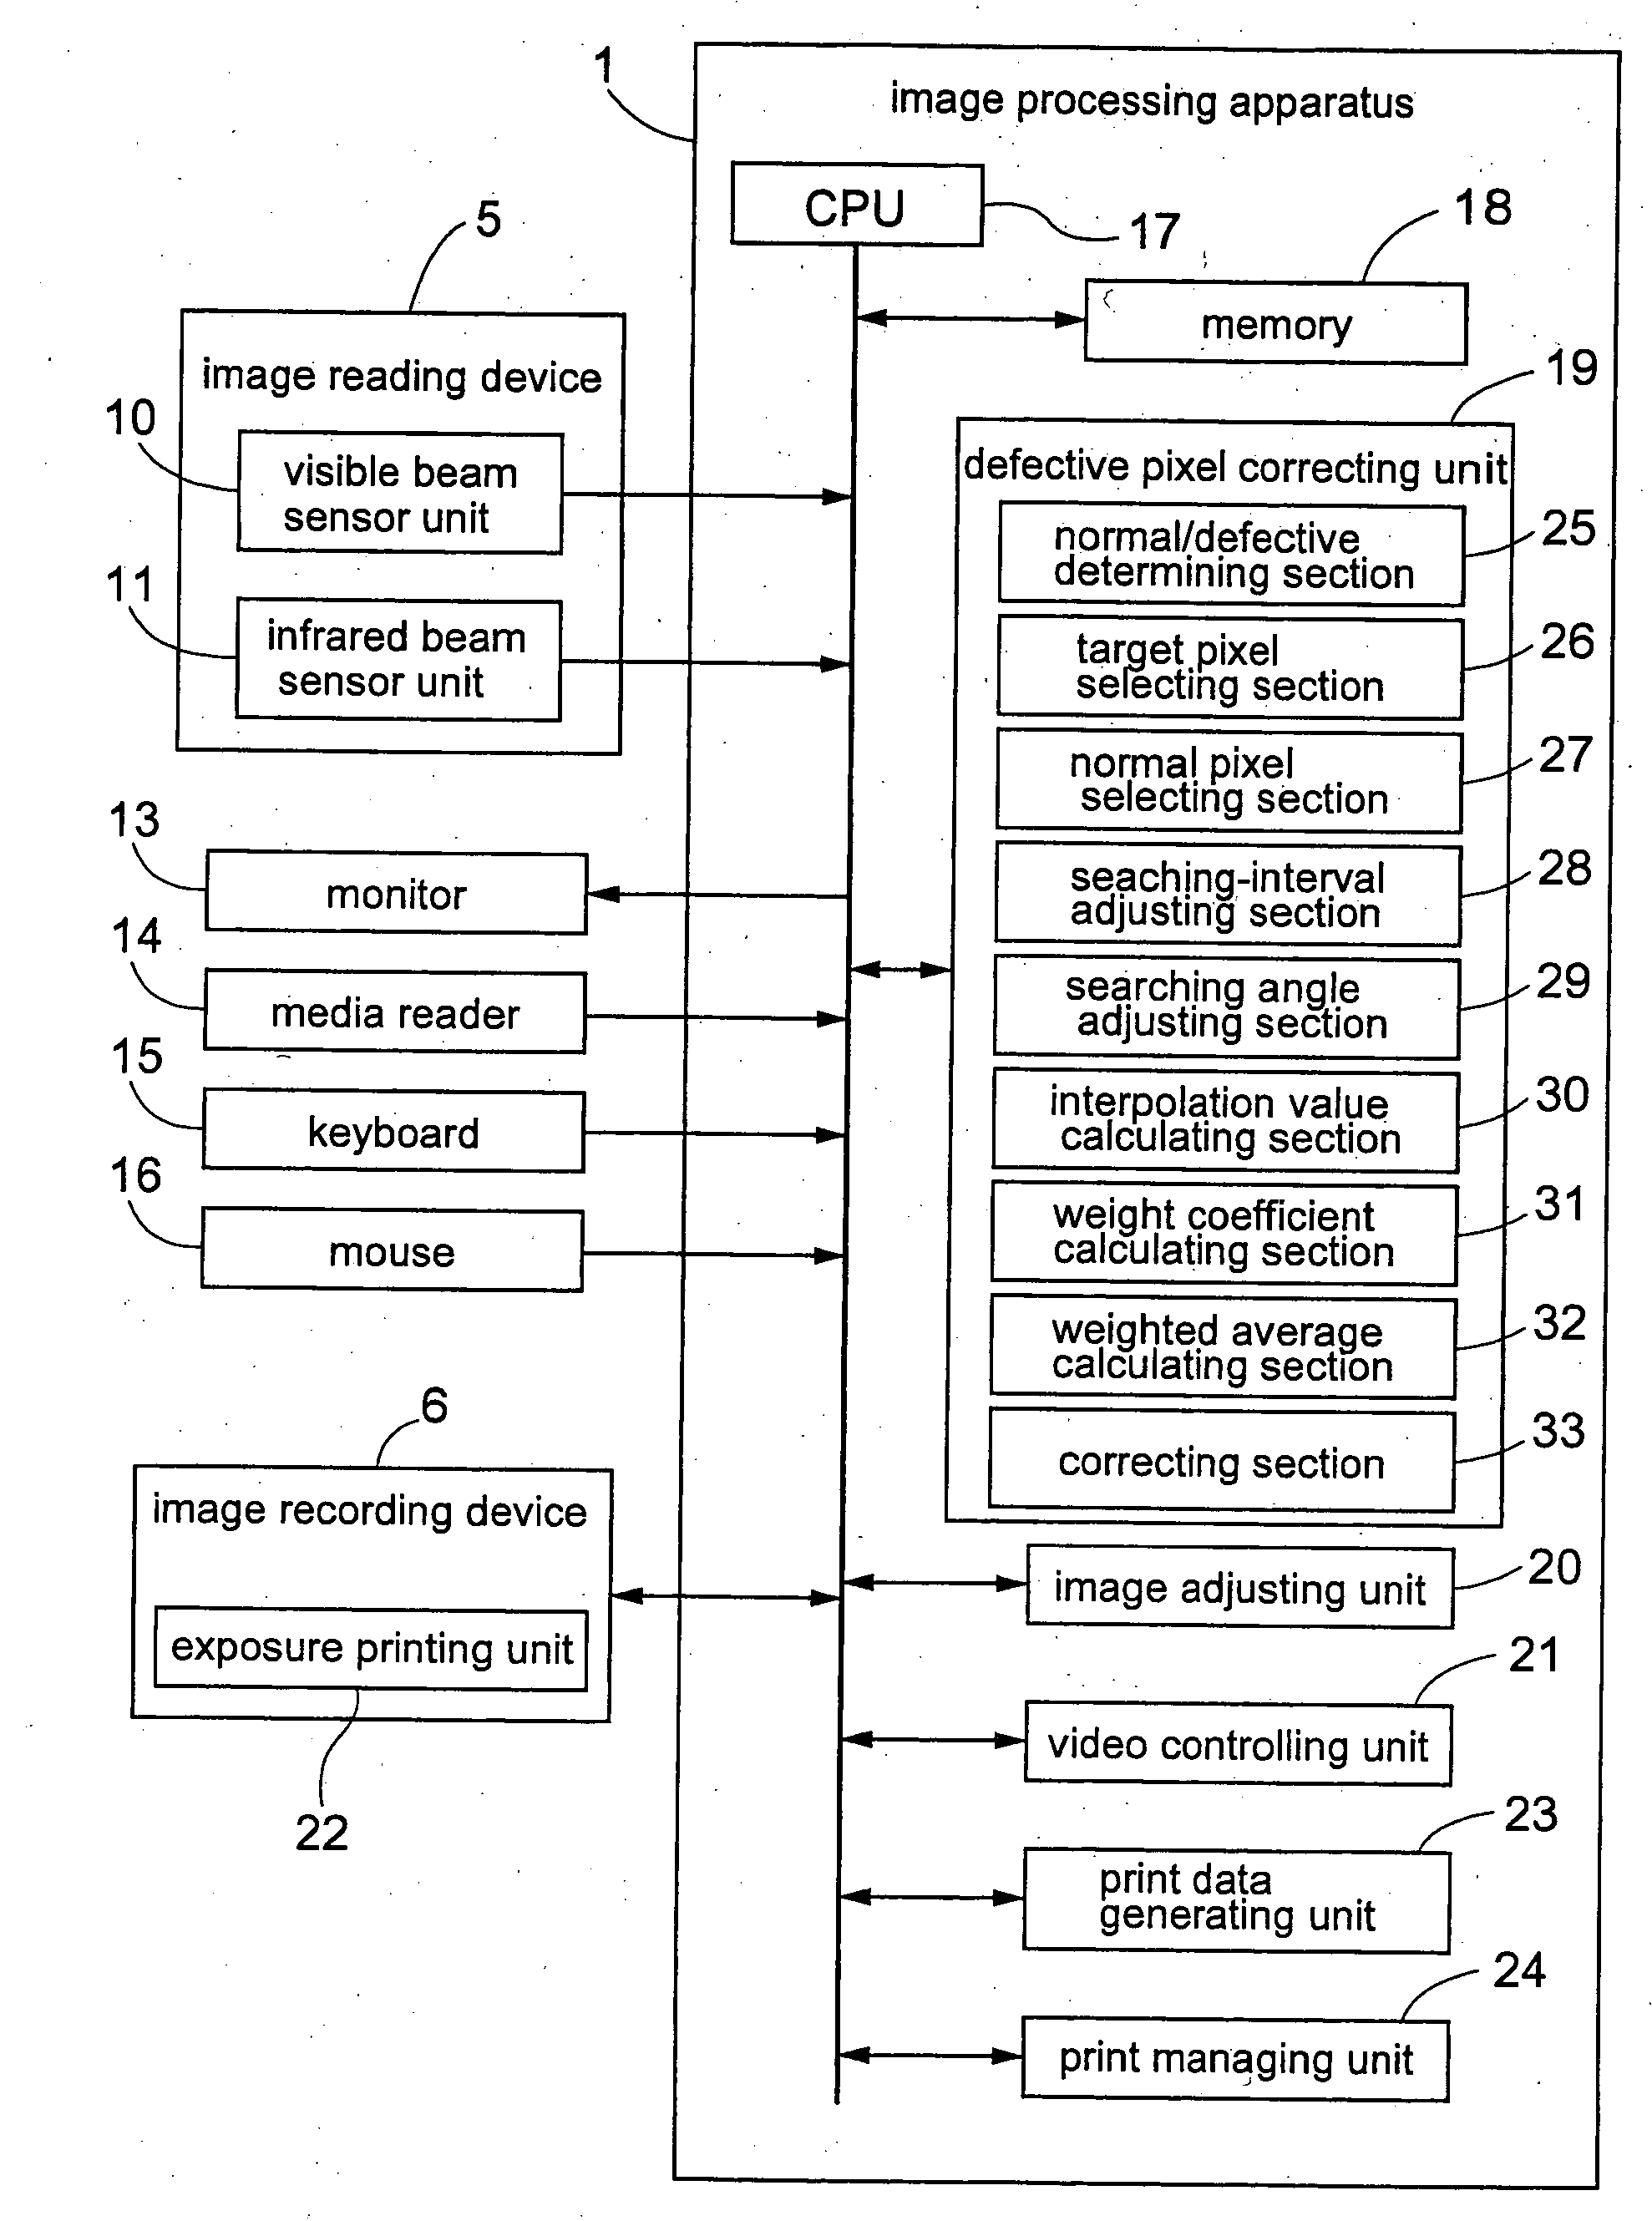 Image processing apparatus and image processing method for correcting image data